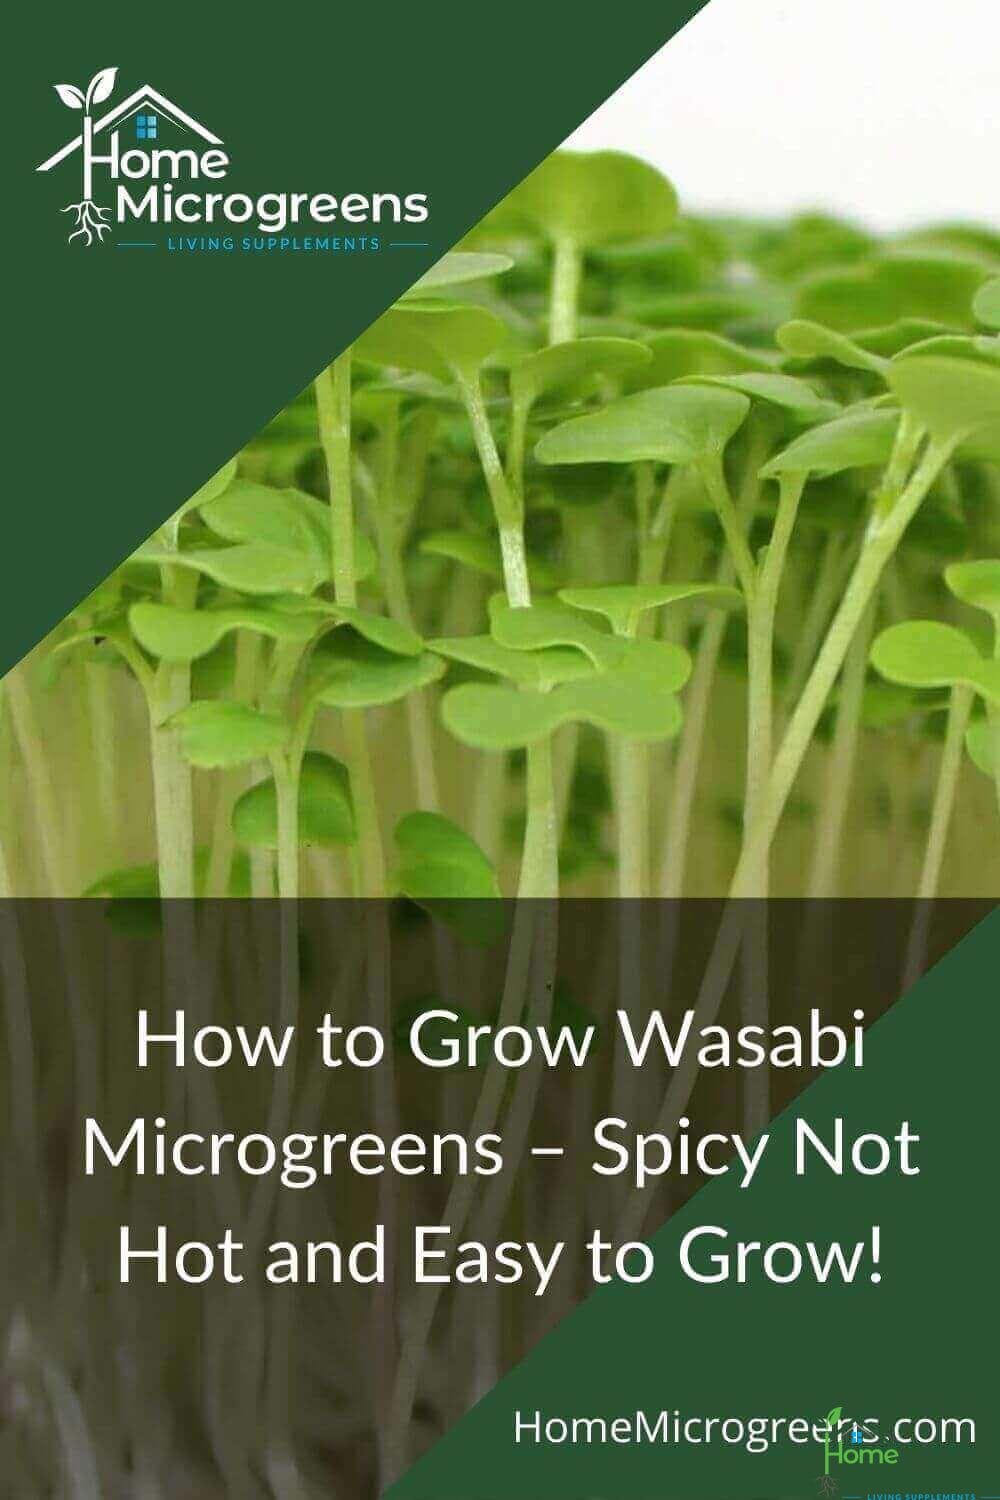 Non-GMO High Germination Rate Resealable Bag Organic Oriental Wasabi Mustard Large Size: 200 Grams Moutarde de Wasabi Mumms Product of Canada Microgreen & Sprouting Seeds 